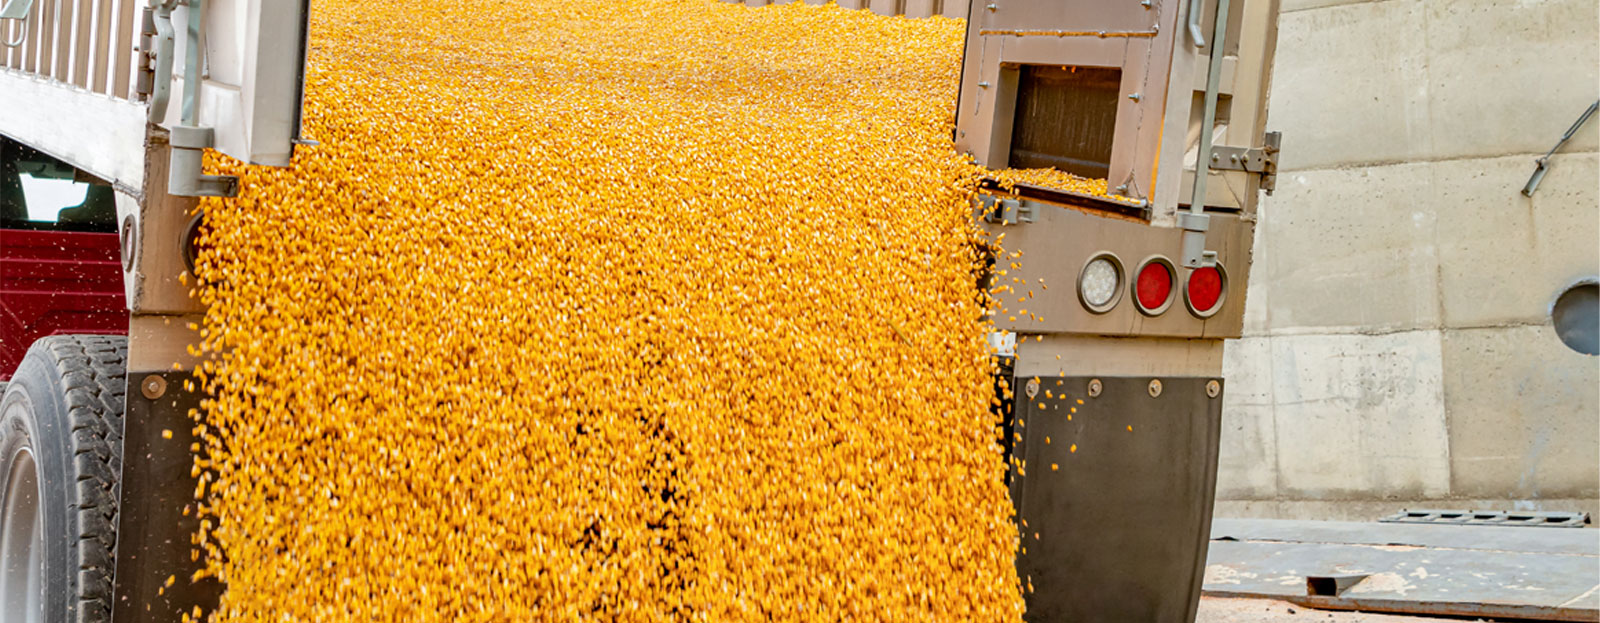 Agriculture commodity markets in 2023 and beyond  